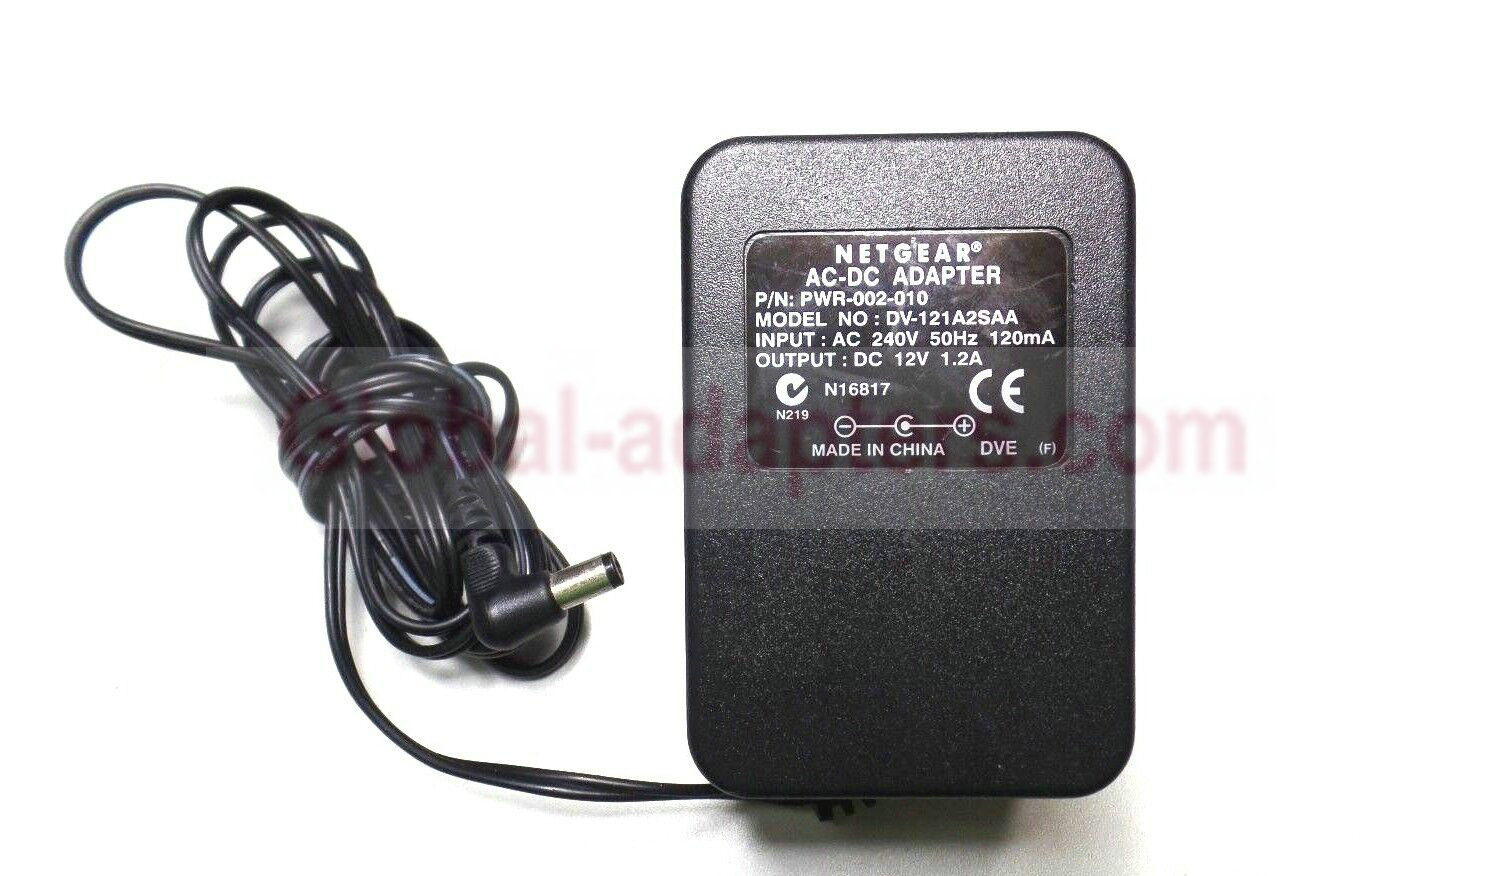 New 12V 1.2A NETGEAR DV-121A2SAA PWR-002-010 Power Supply Ac Adapter - Click Image to Close